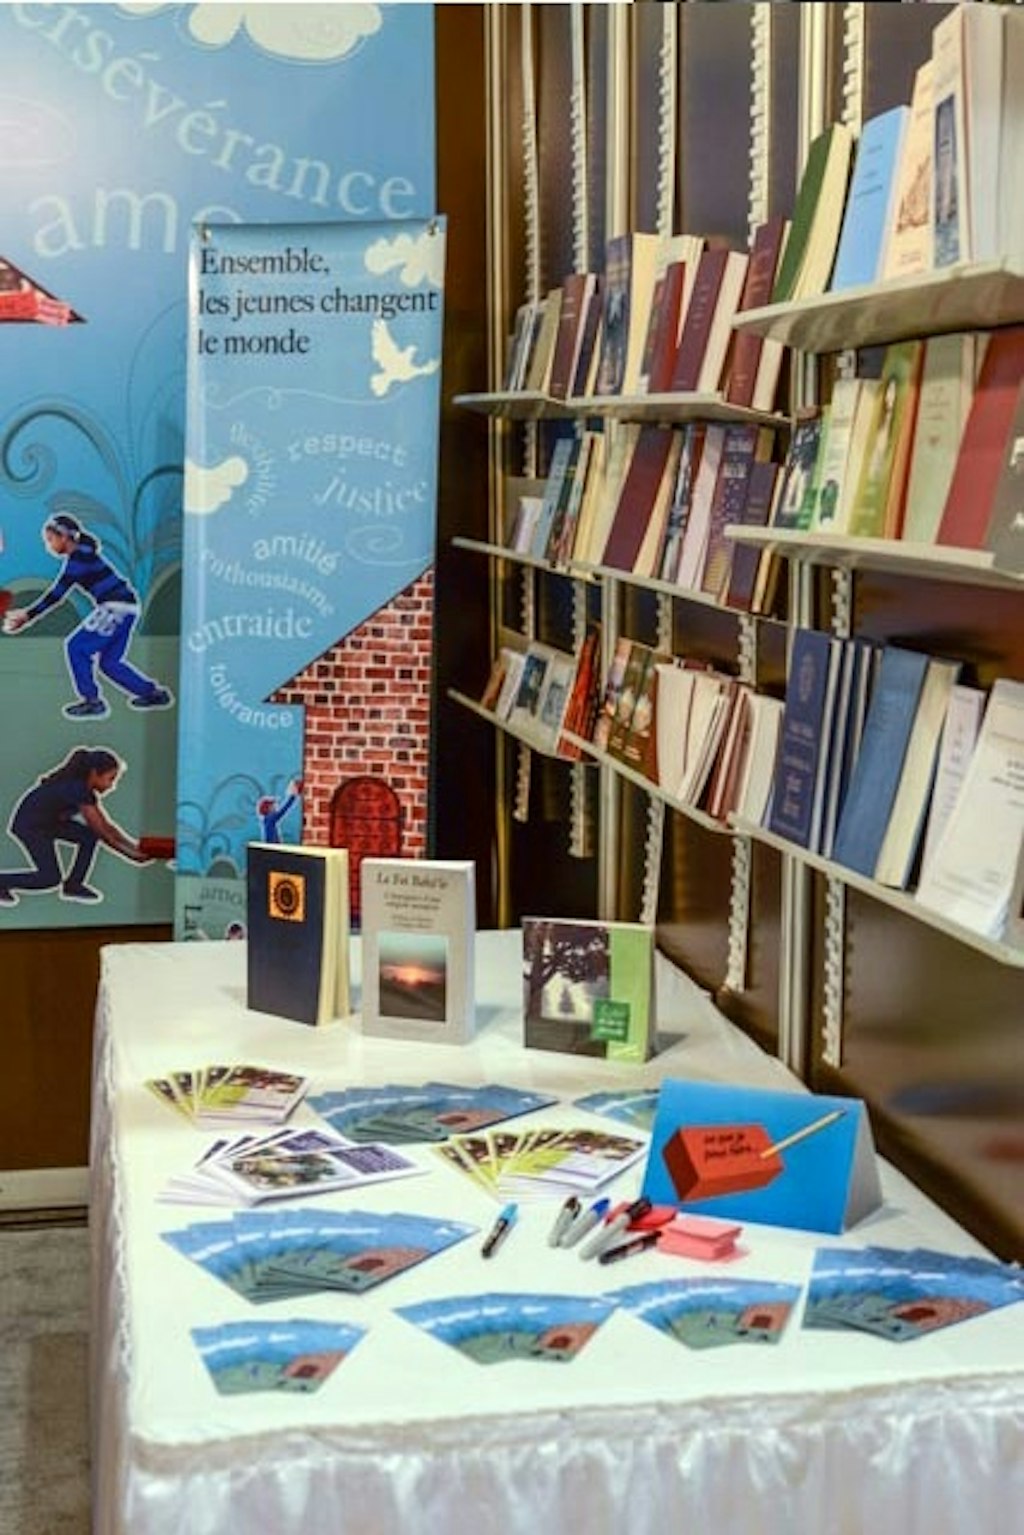 37th Montreal Book Fair attracts throngs of youth